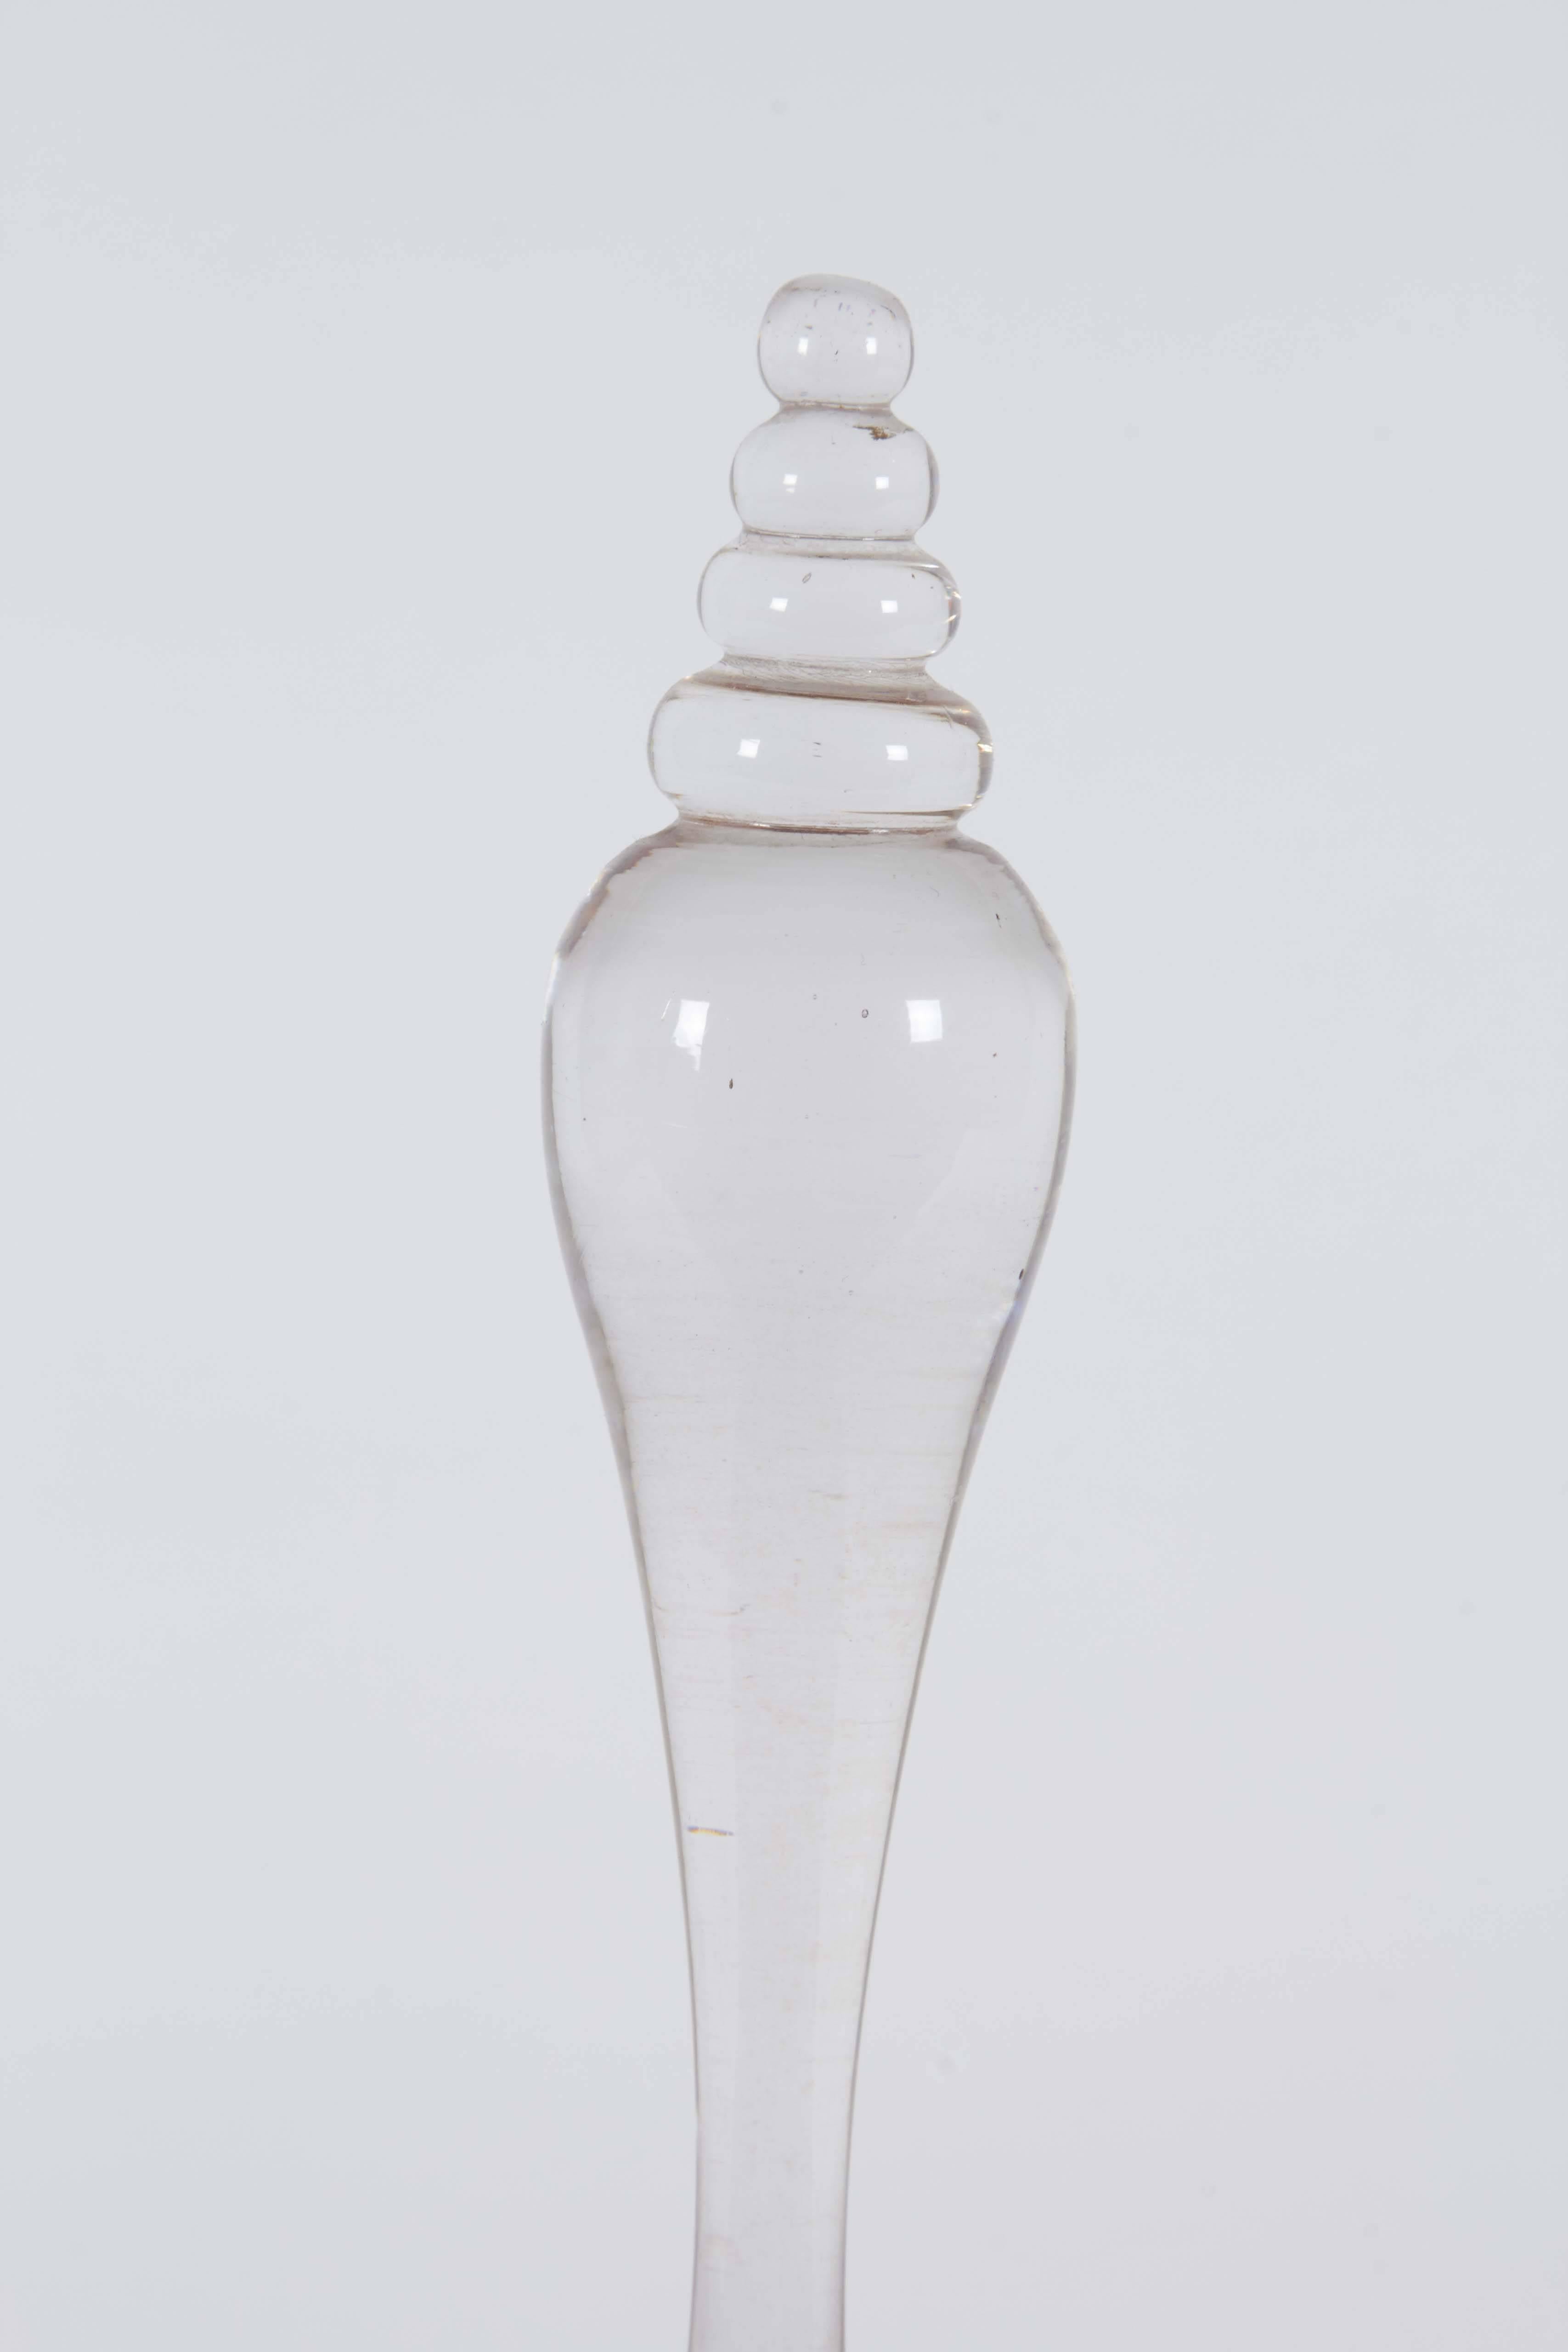 1880 English Cranberry Decorative Glass Bell In Good Condition For Sale In New York, NY